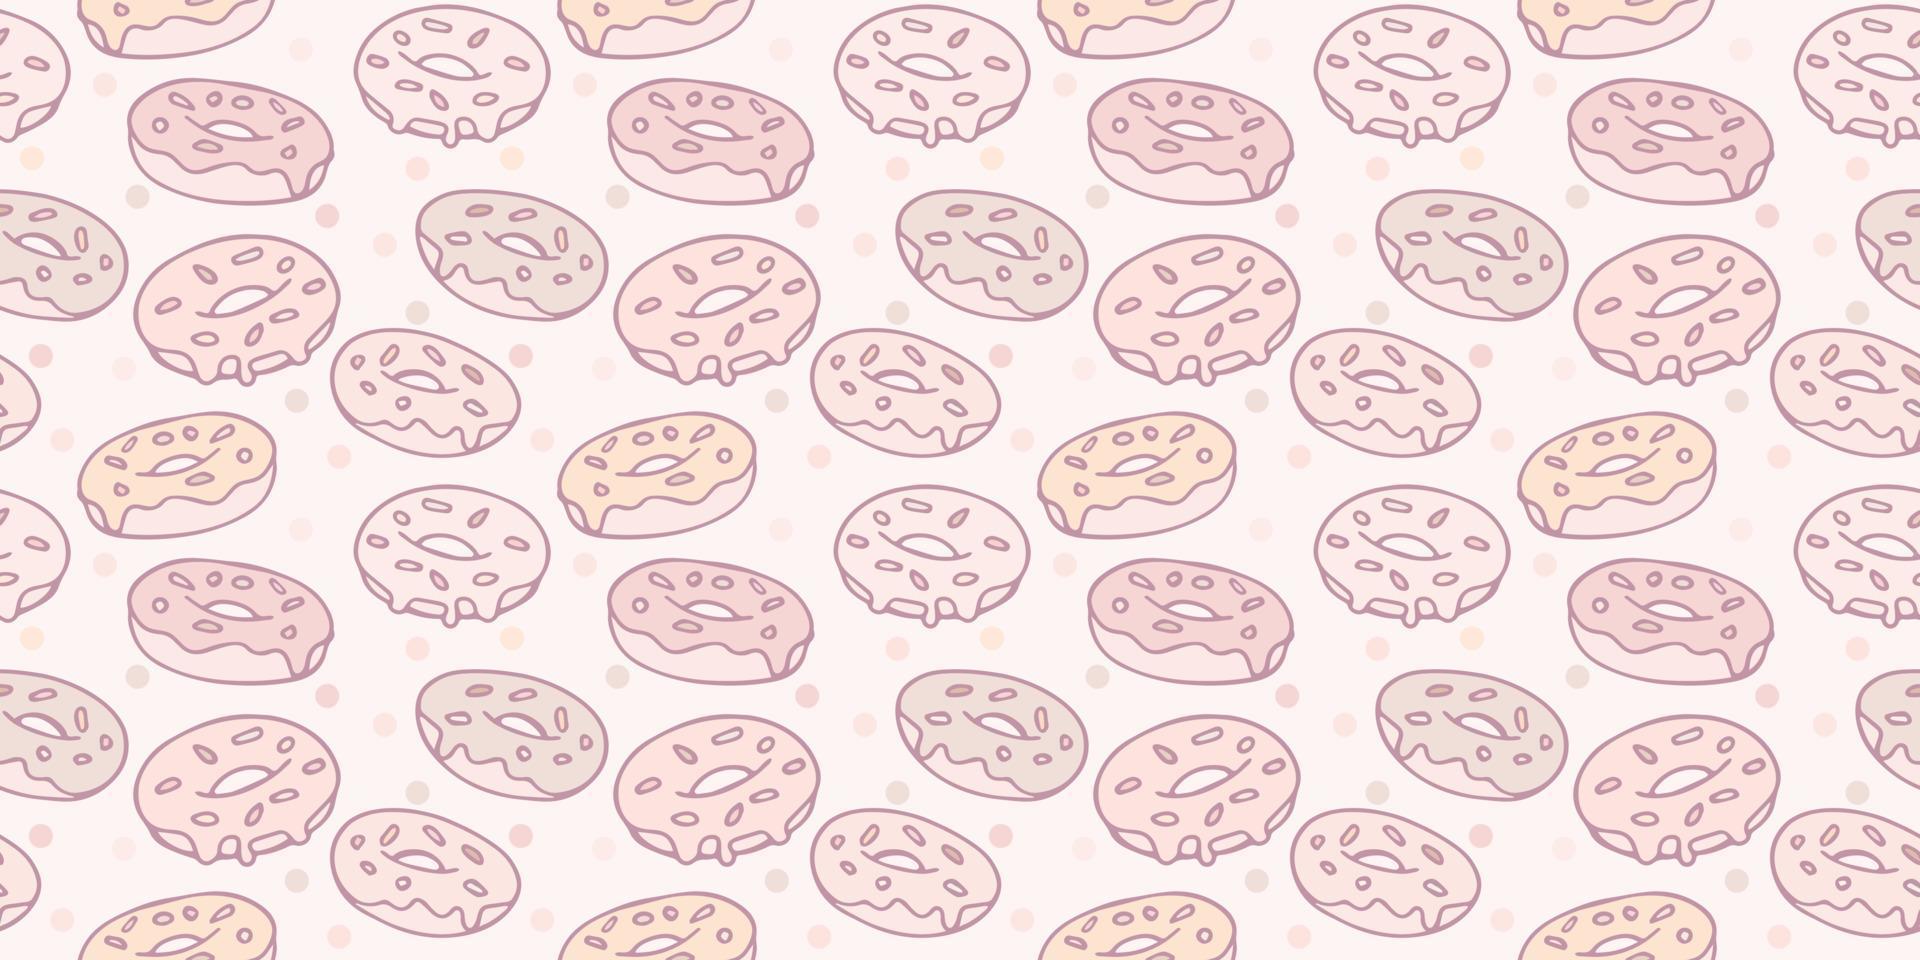 Donuts seamless repeat pattern background vector